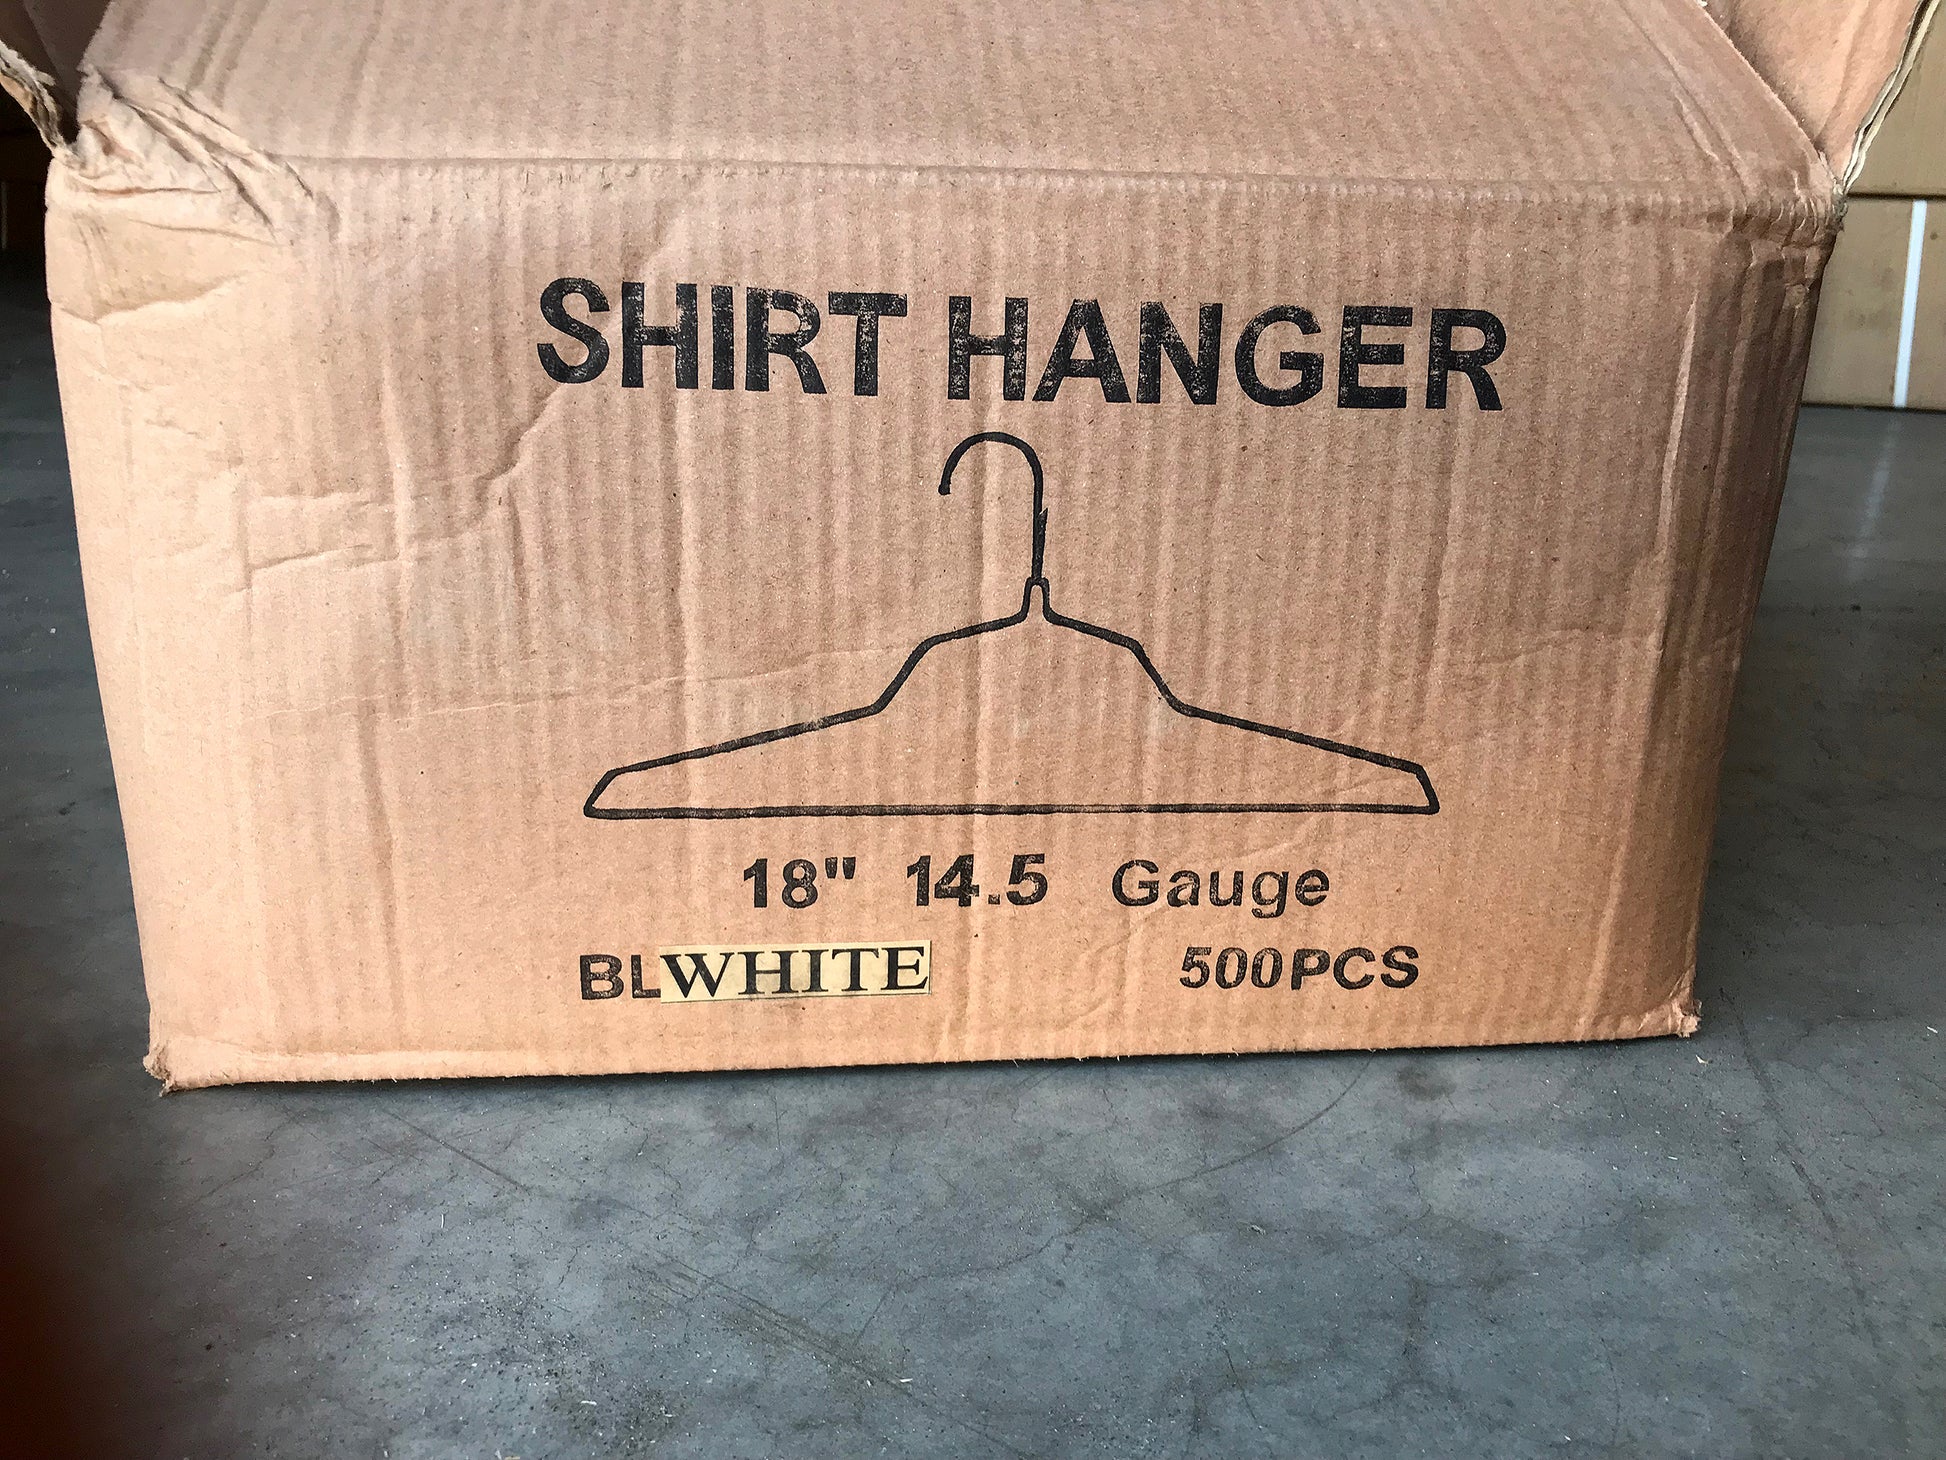 Fabricare Choice - Case of 500 White 18 Wire Shirt Hangers